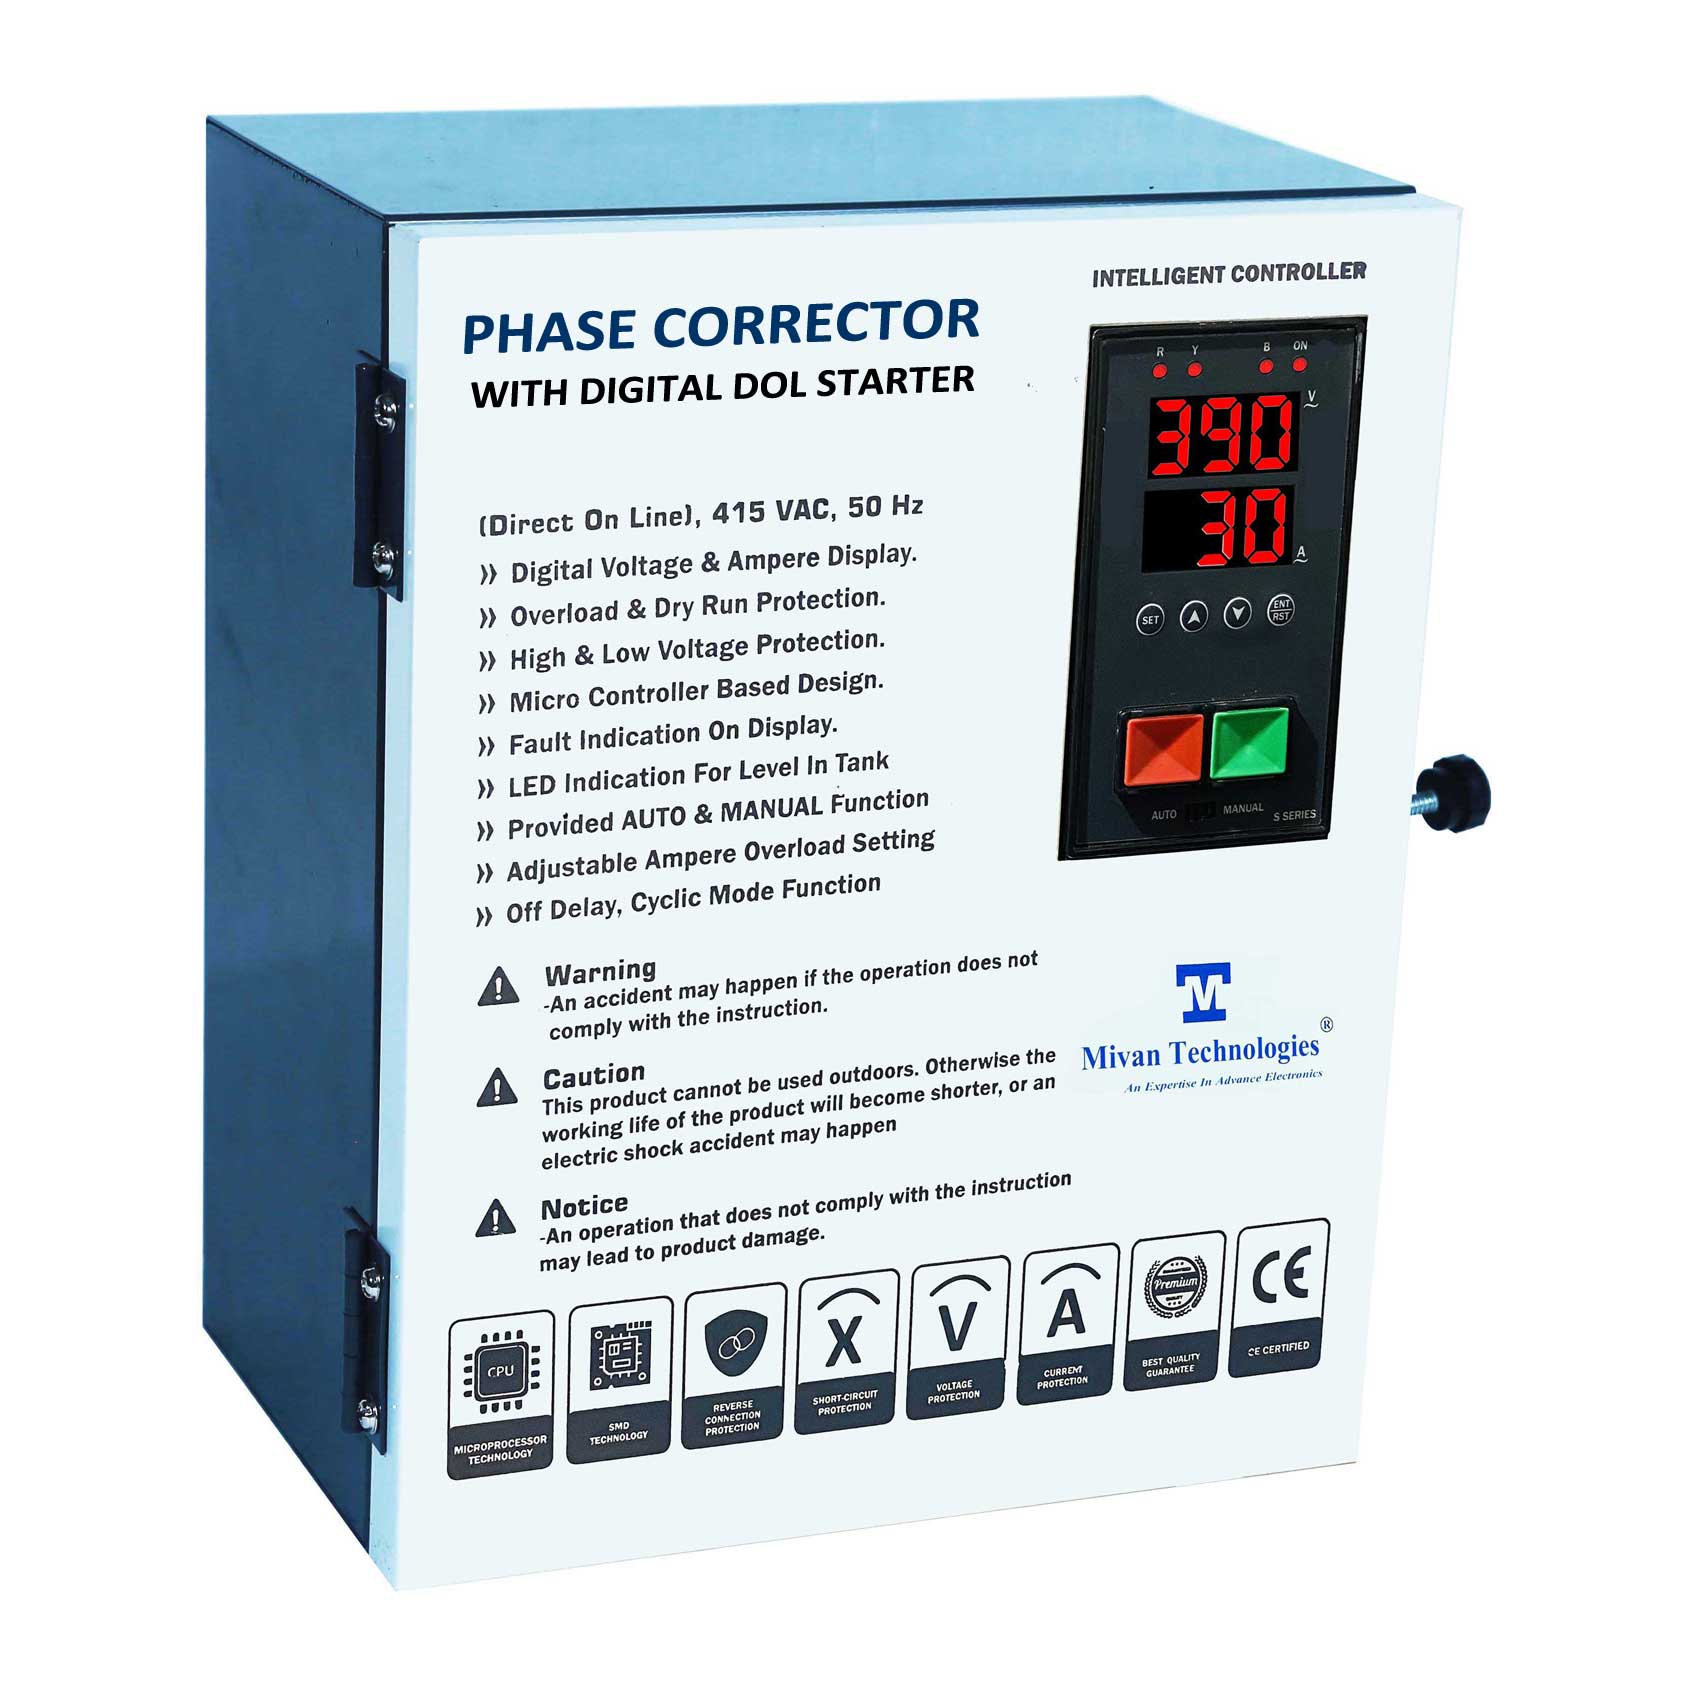 Phase corrector with DOL starter it will give correct phase sequence R Y B at output even there is not a correct sequence at input with HV LV OL DRY protection SPP and auto switch